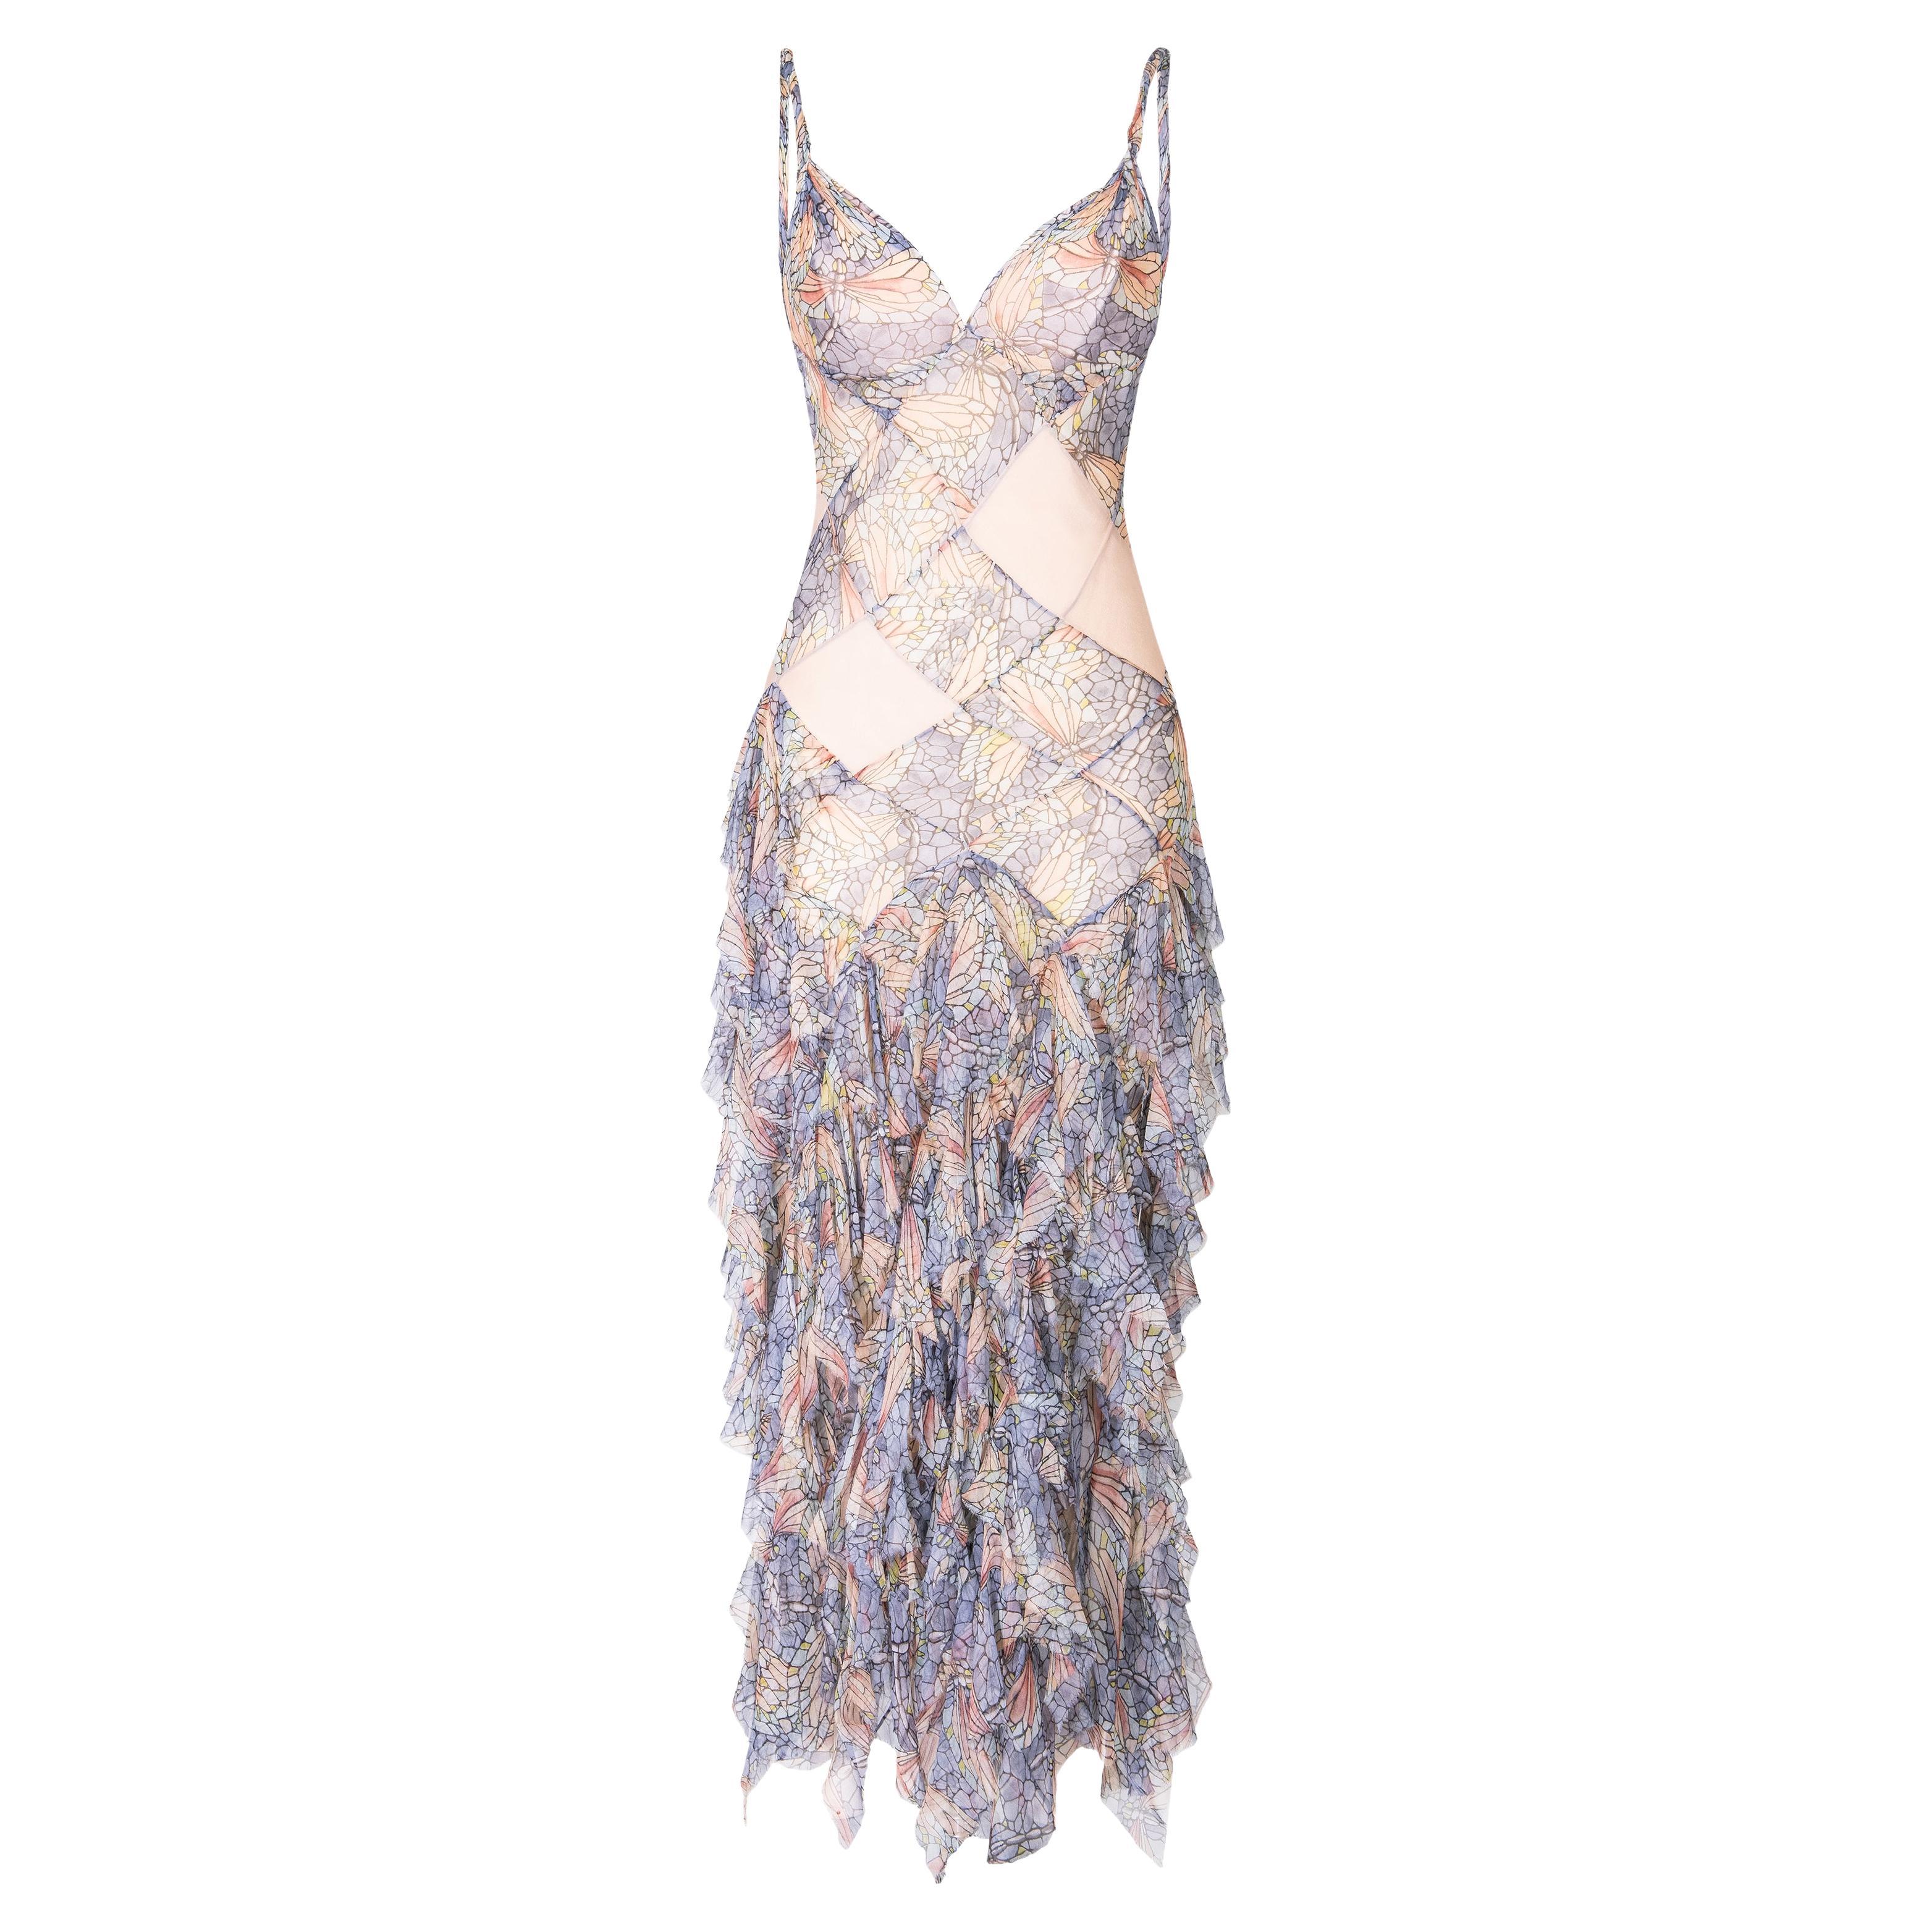 Stephen Sprouse Sequin Dress - 2 For Sale on 1stDibs